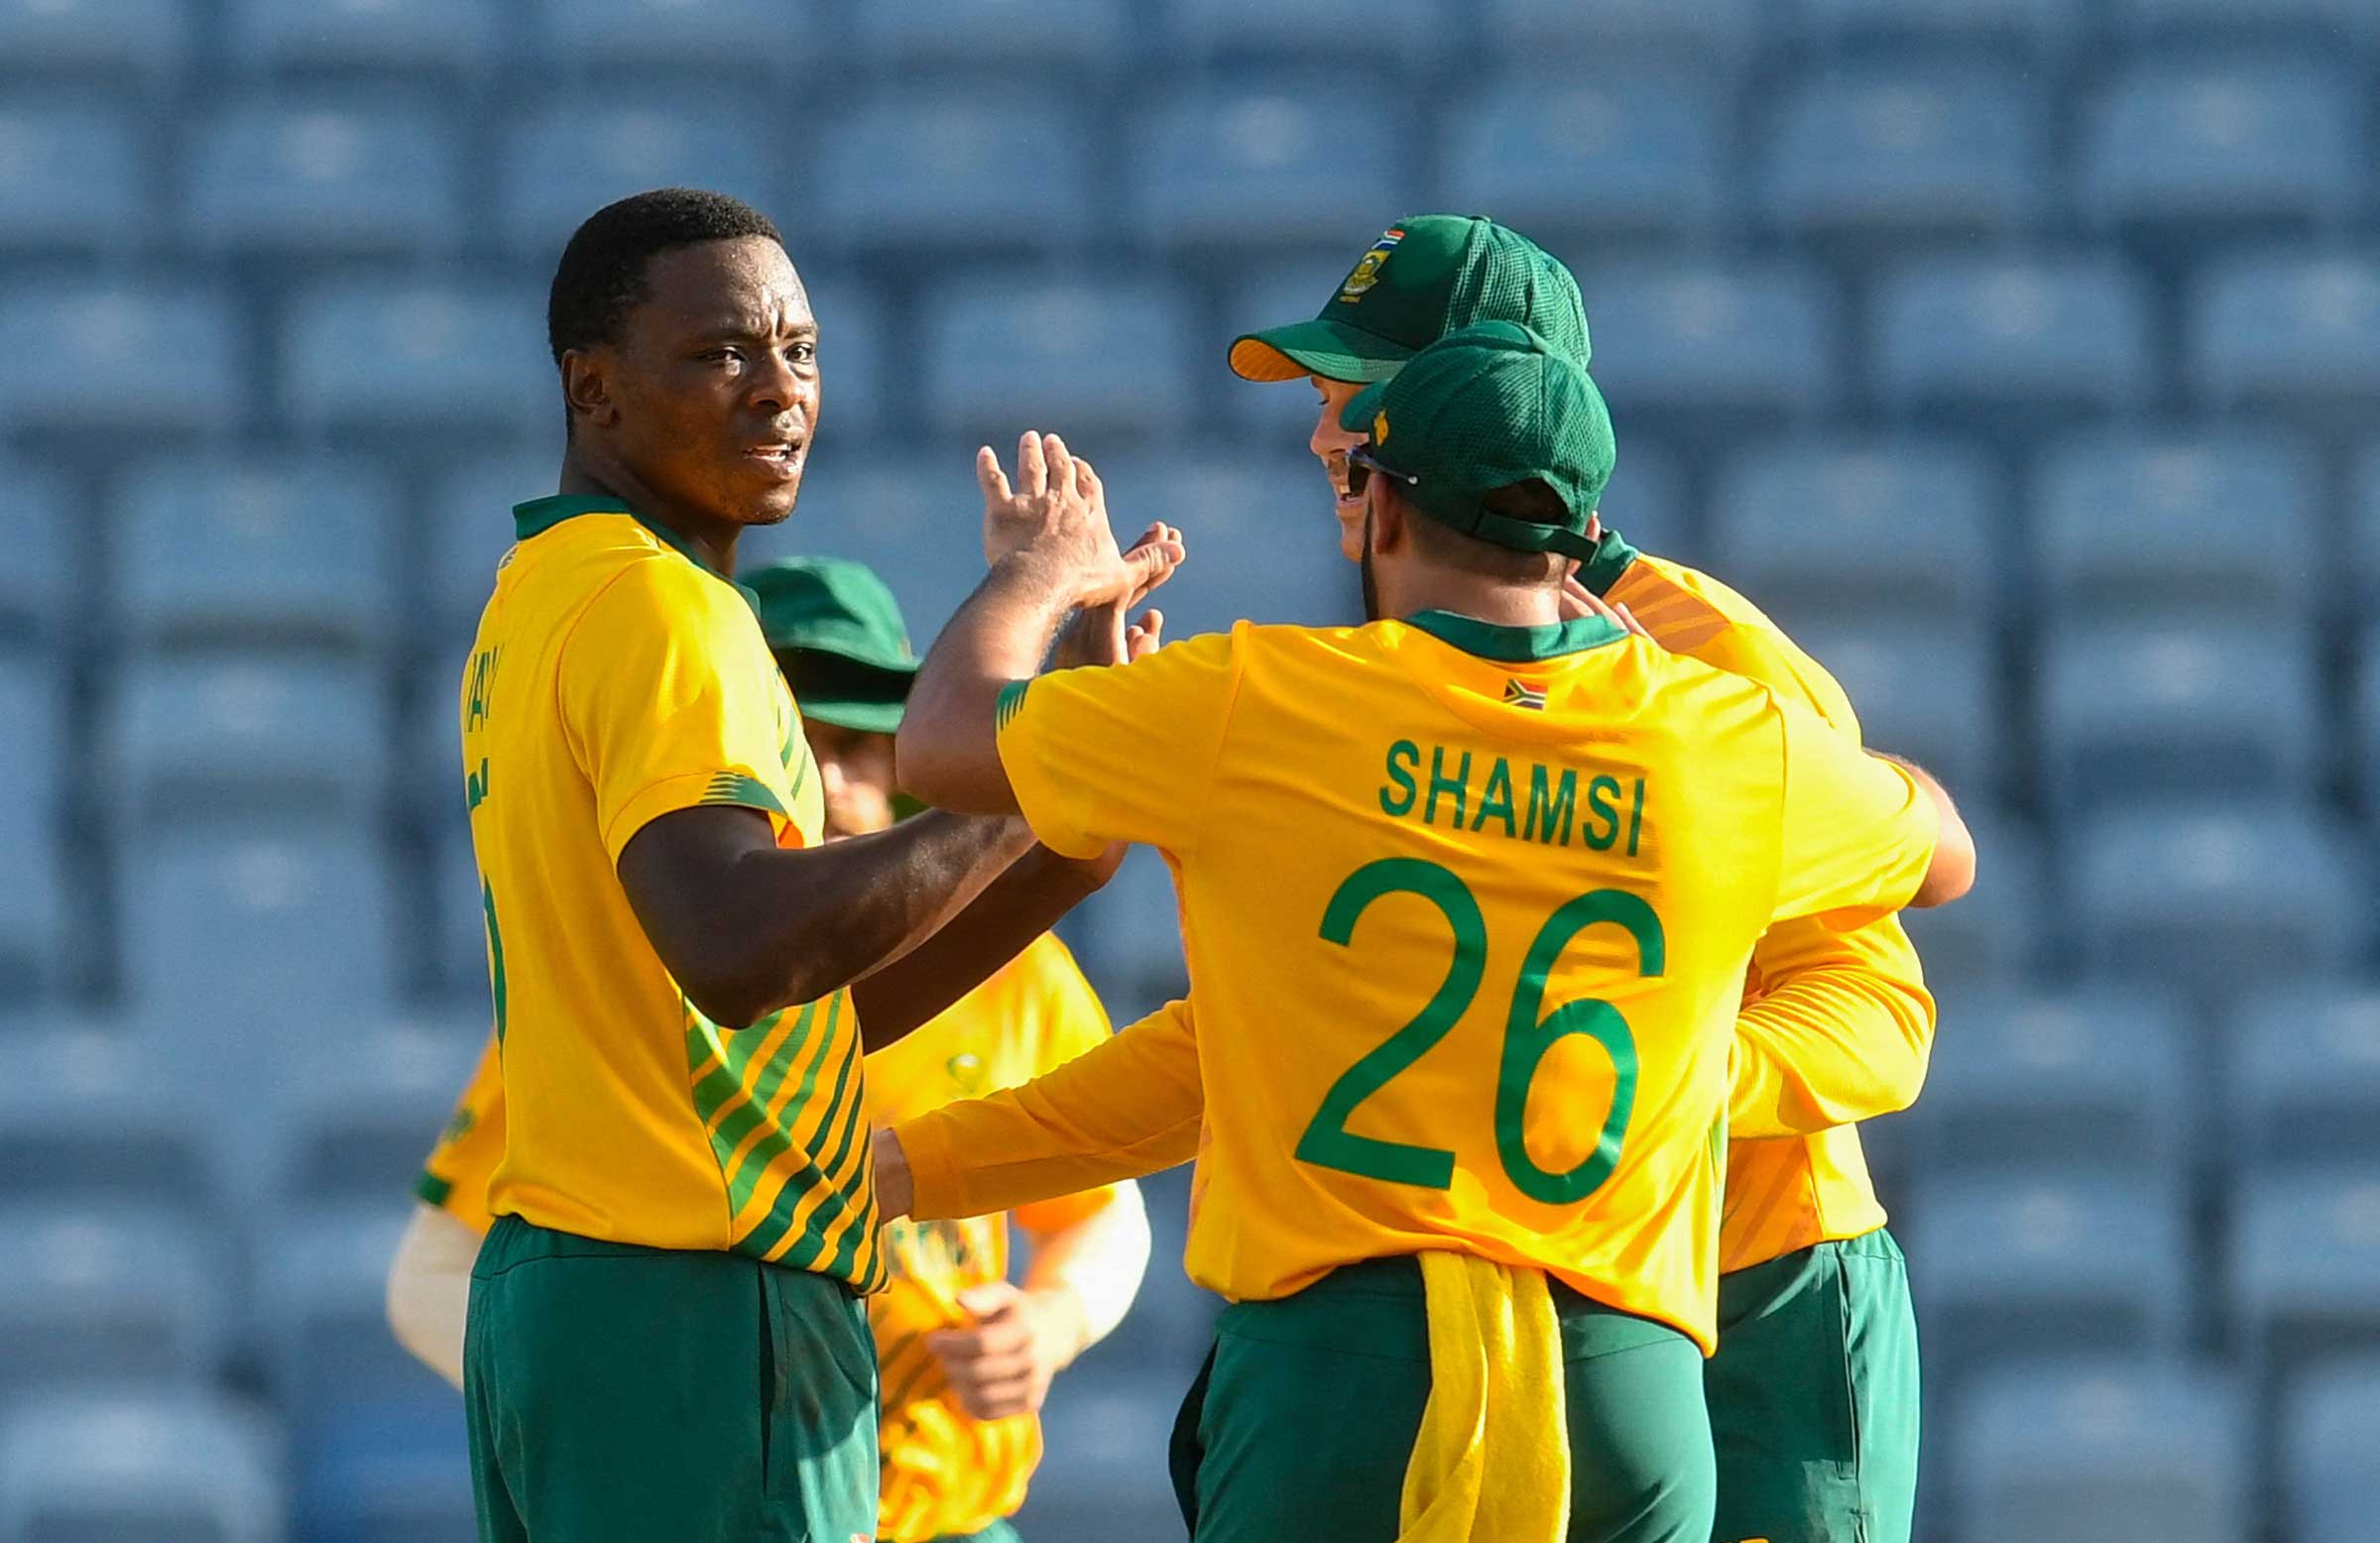 Twitter reacts to pumped up Kagiso Rabada controlling his emotions to escape potential ICC sanction